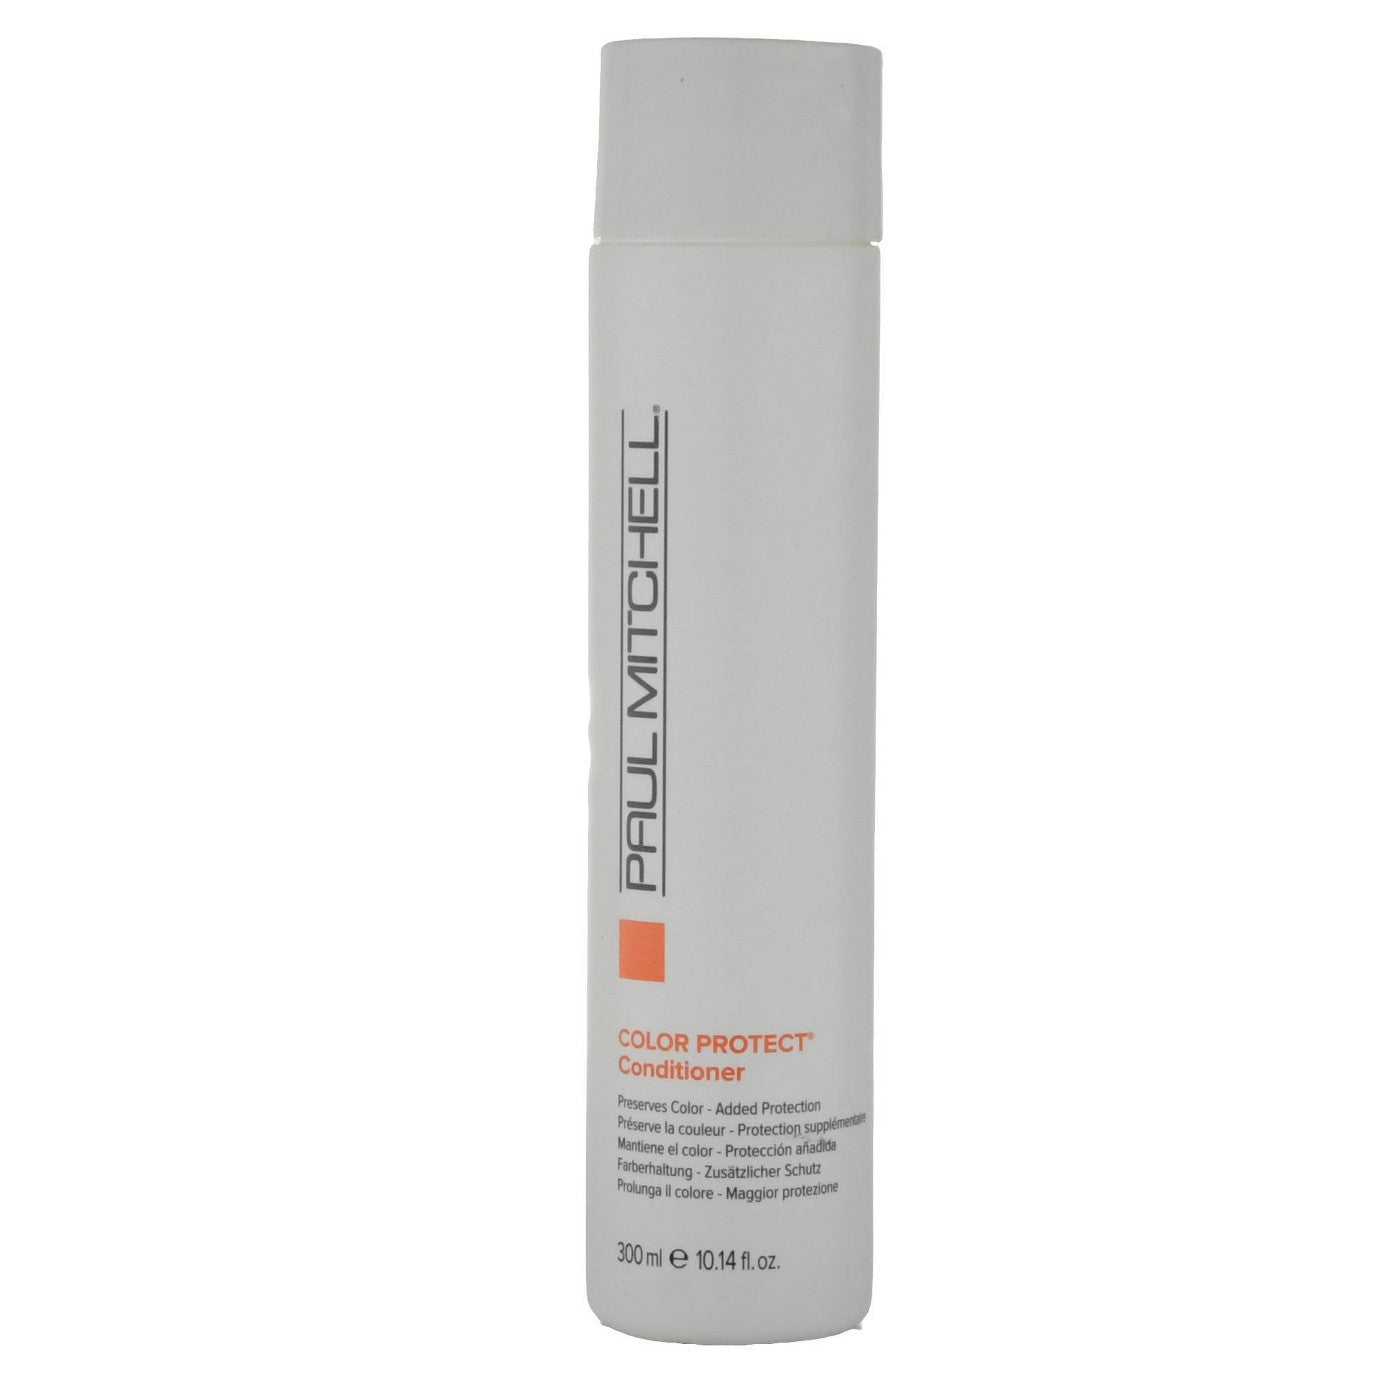 Paul Mitchell Color Protect Daily Conditioner - 10.14 fl oz